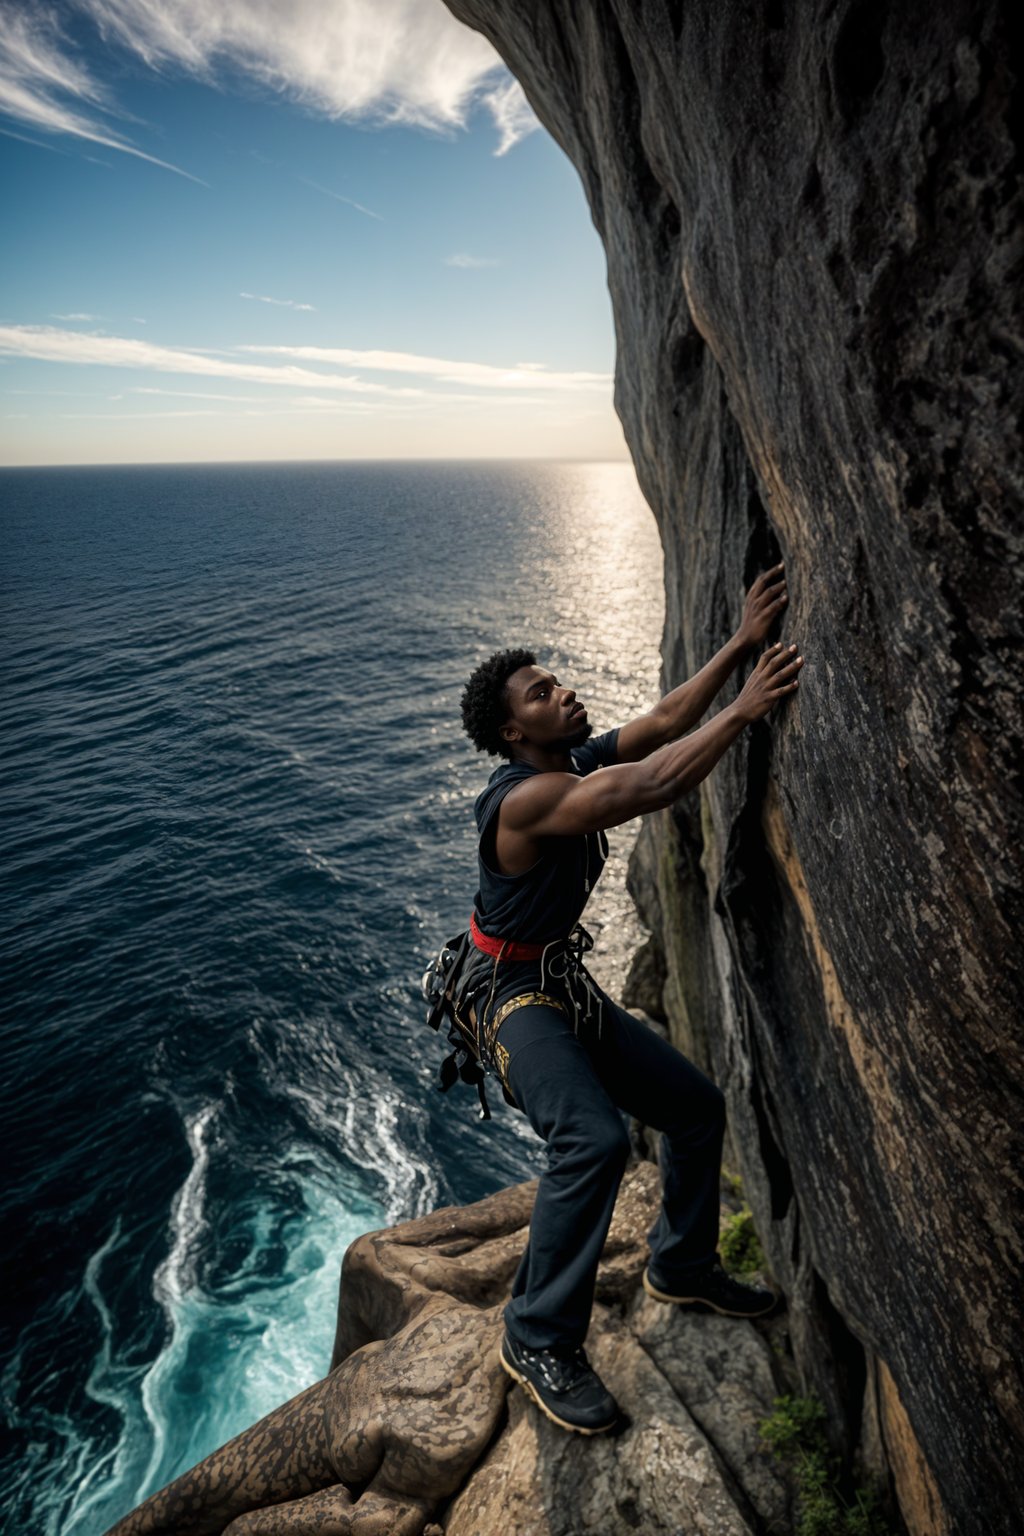 man as adventurer rock climbing a daunting cliff with a breathtaking sea view